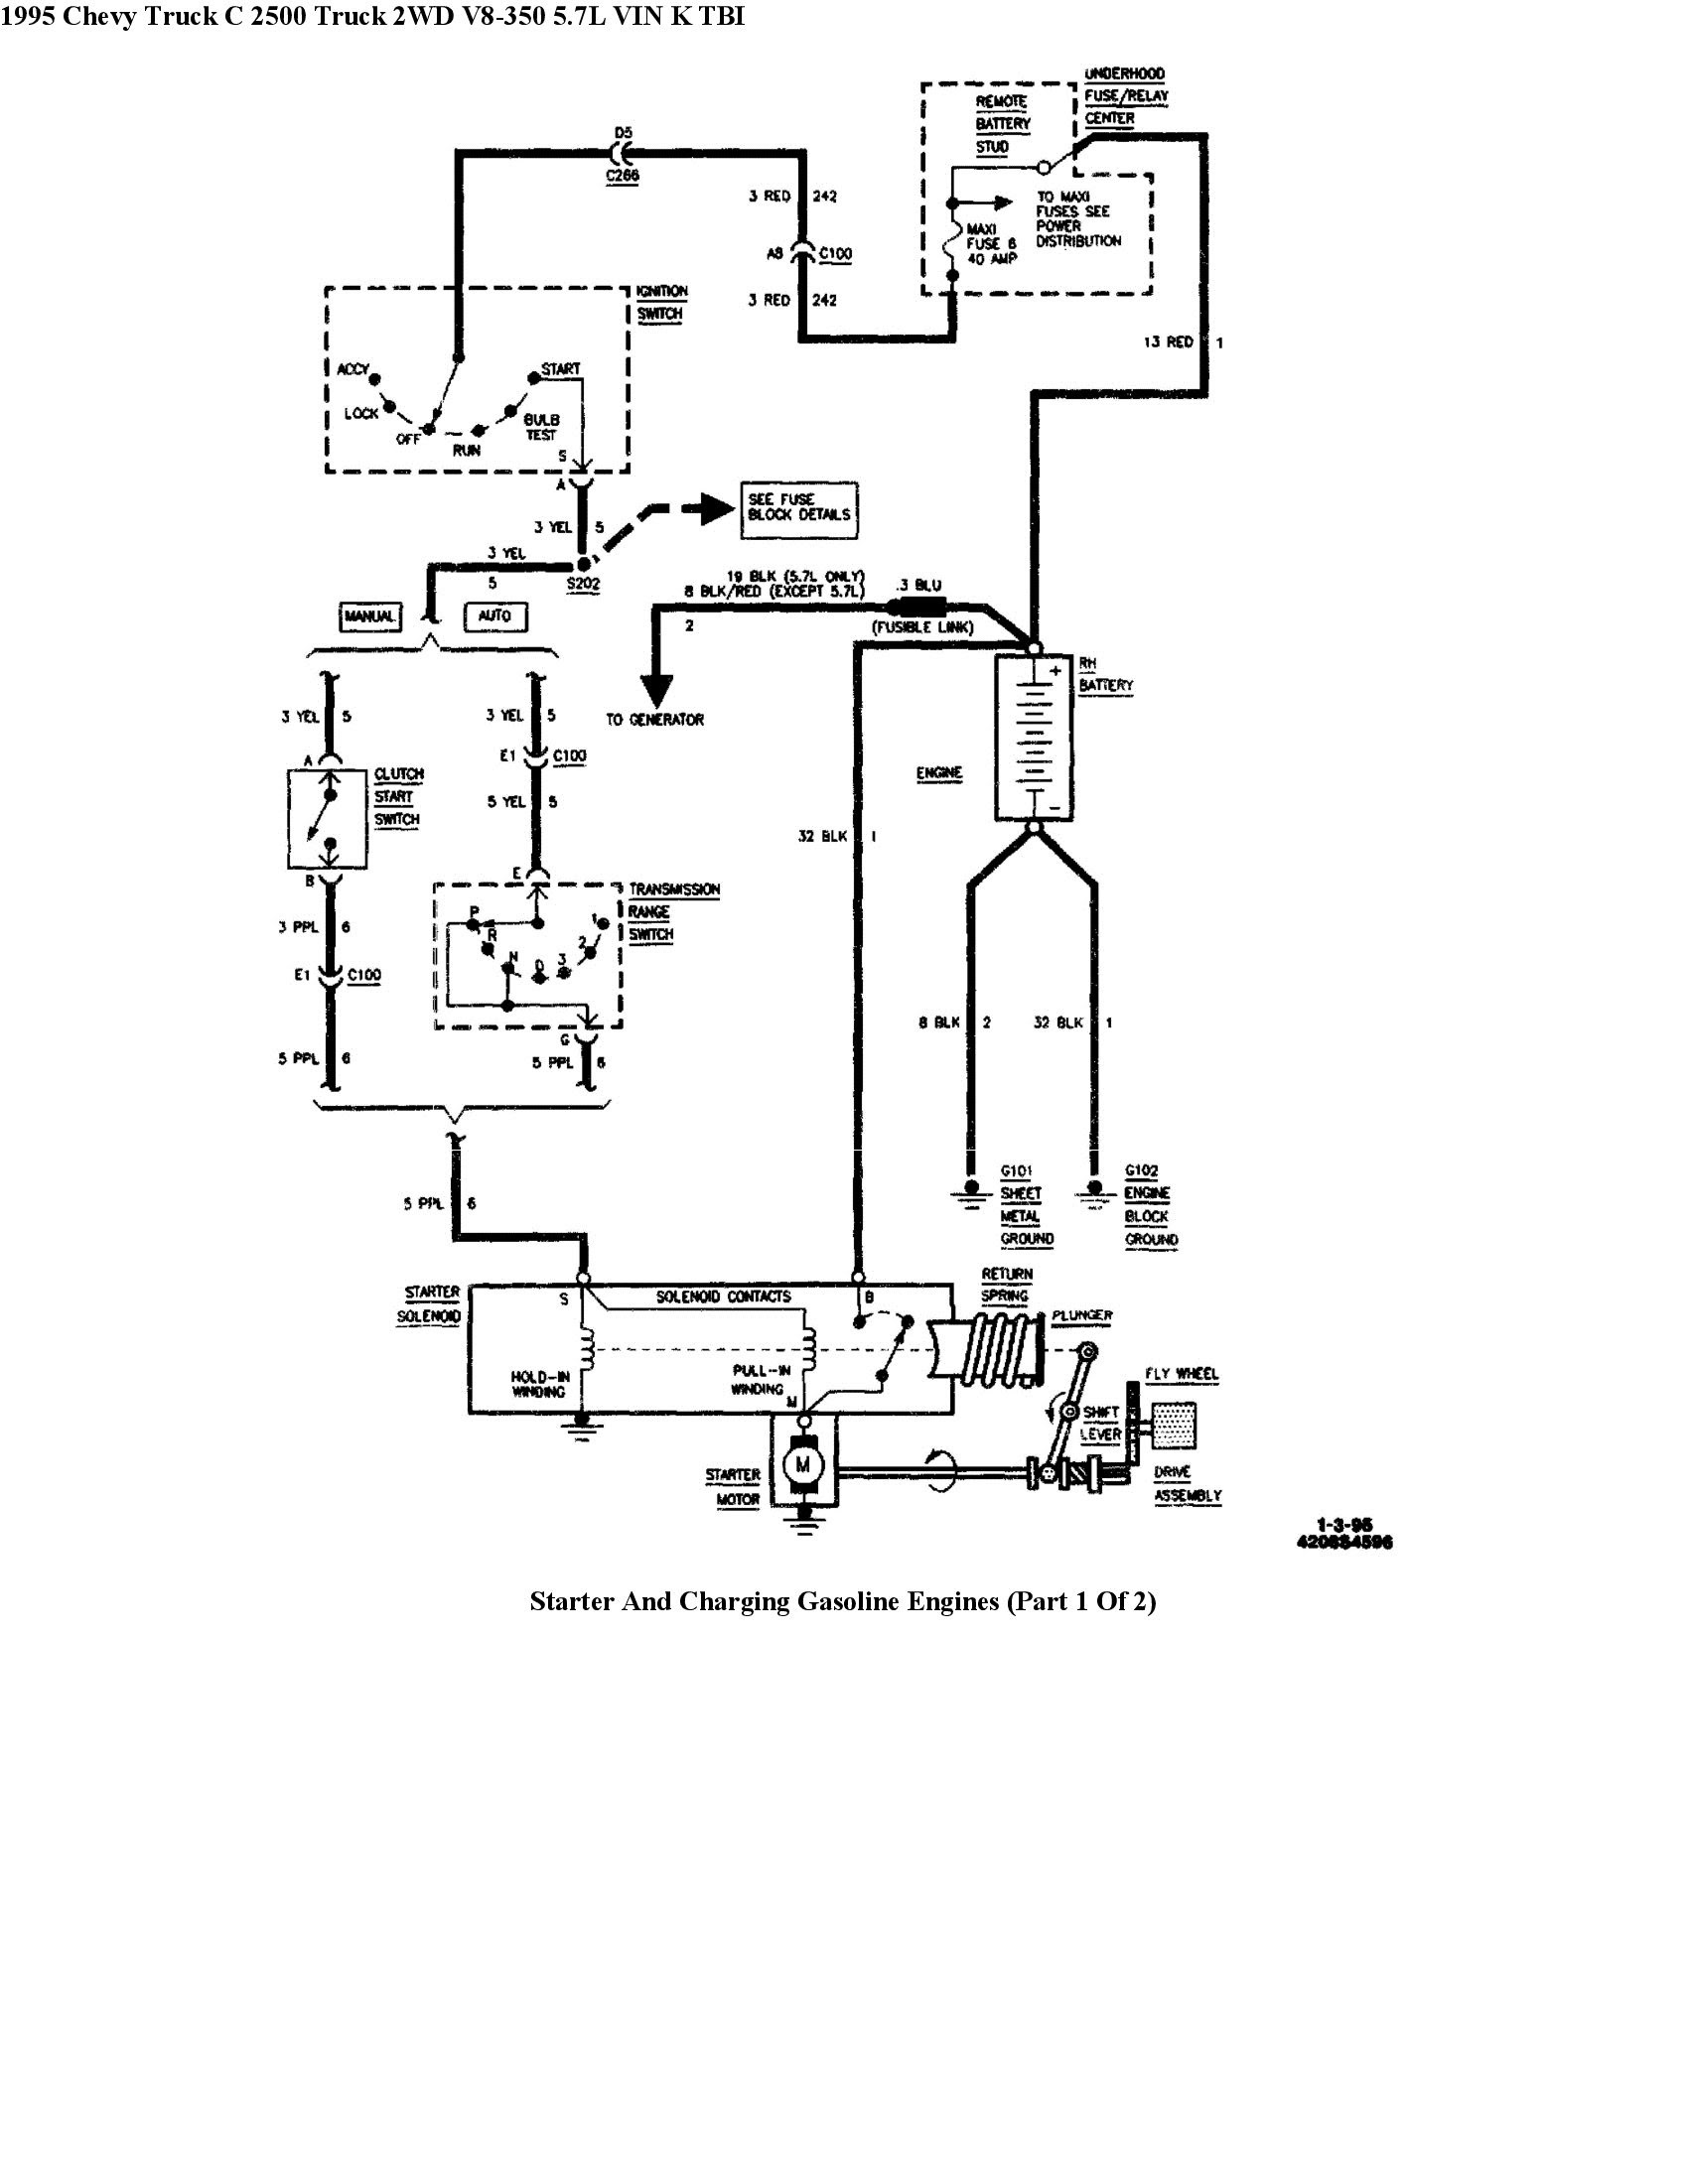 Ignition Switch Wiring Diagram 1995 Chevy 2500 Truck